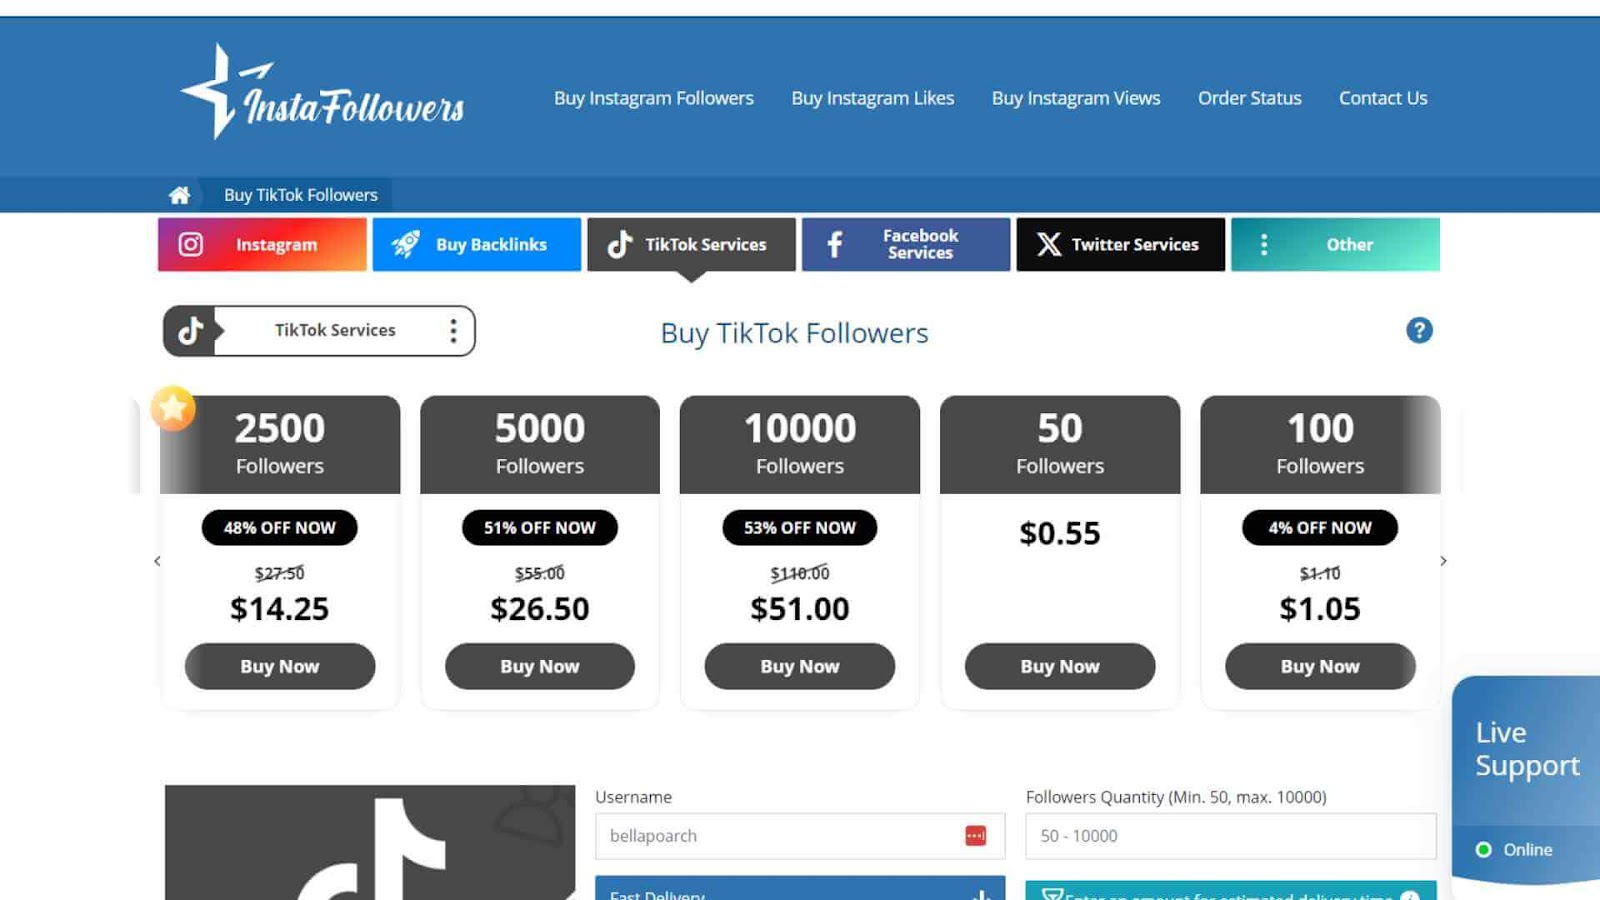 A pricing chart from a service called InstaFollowers for purchasing TikTok followers, displaying different follower packages for sale.